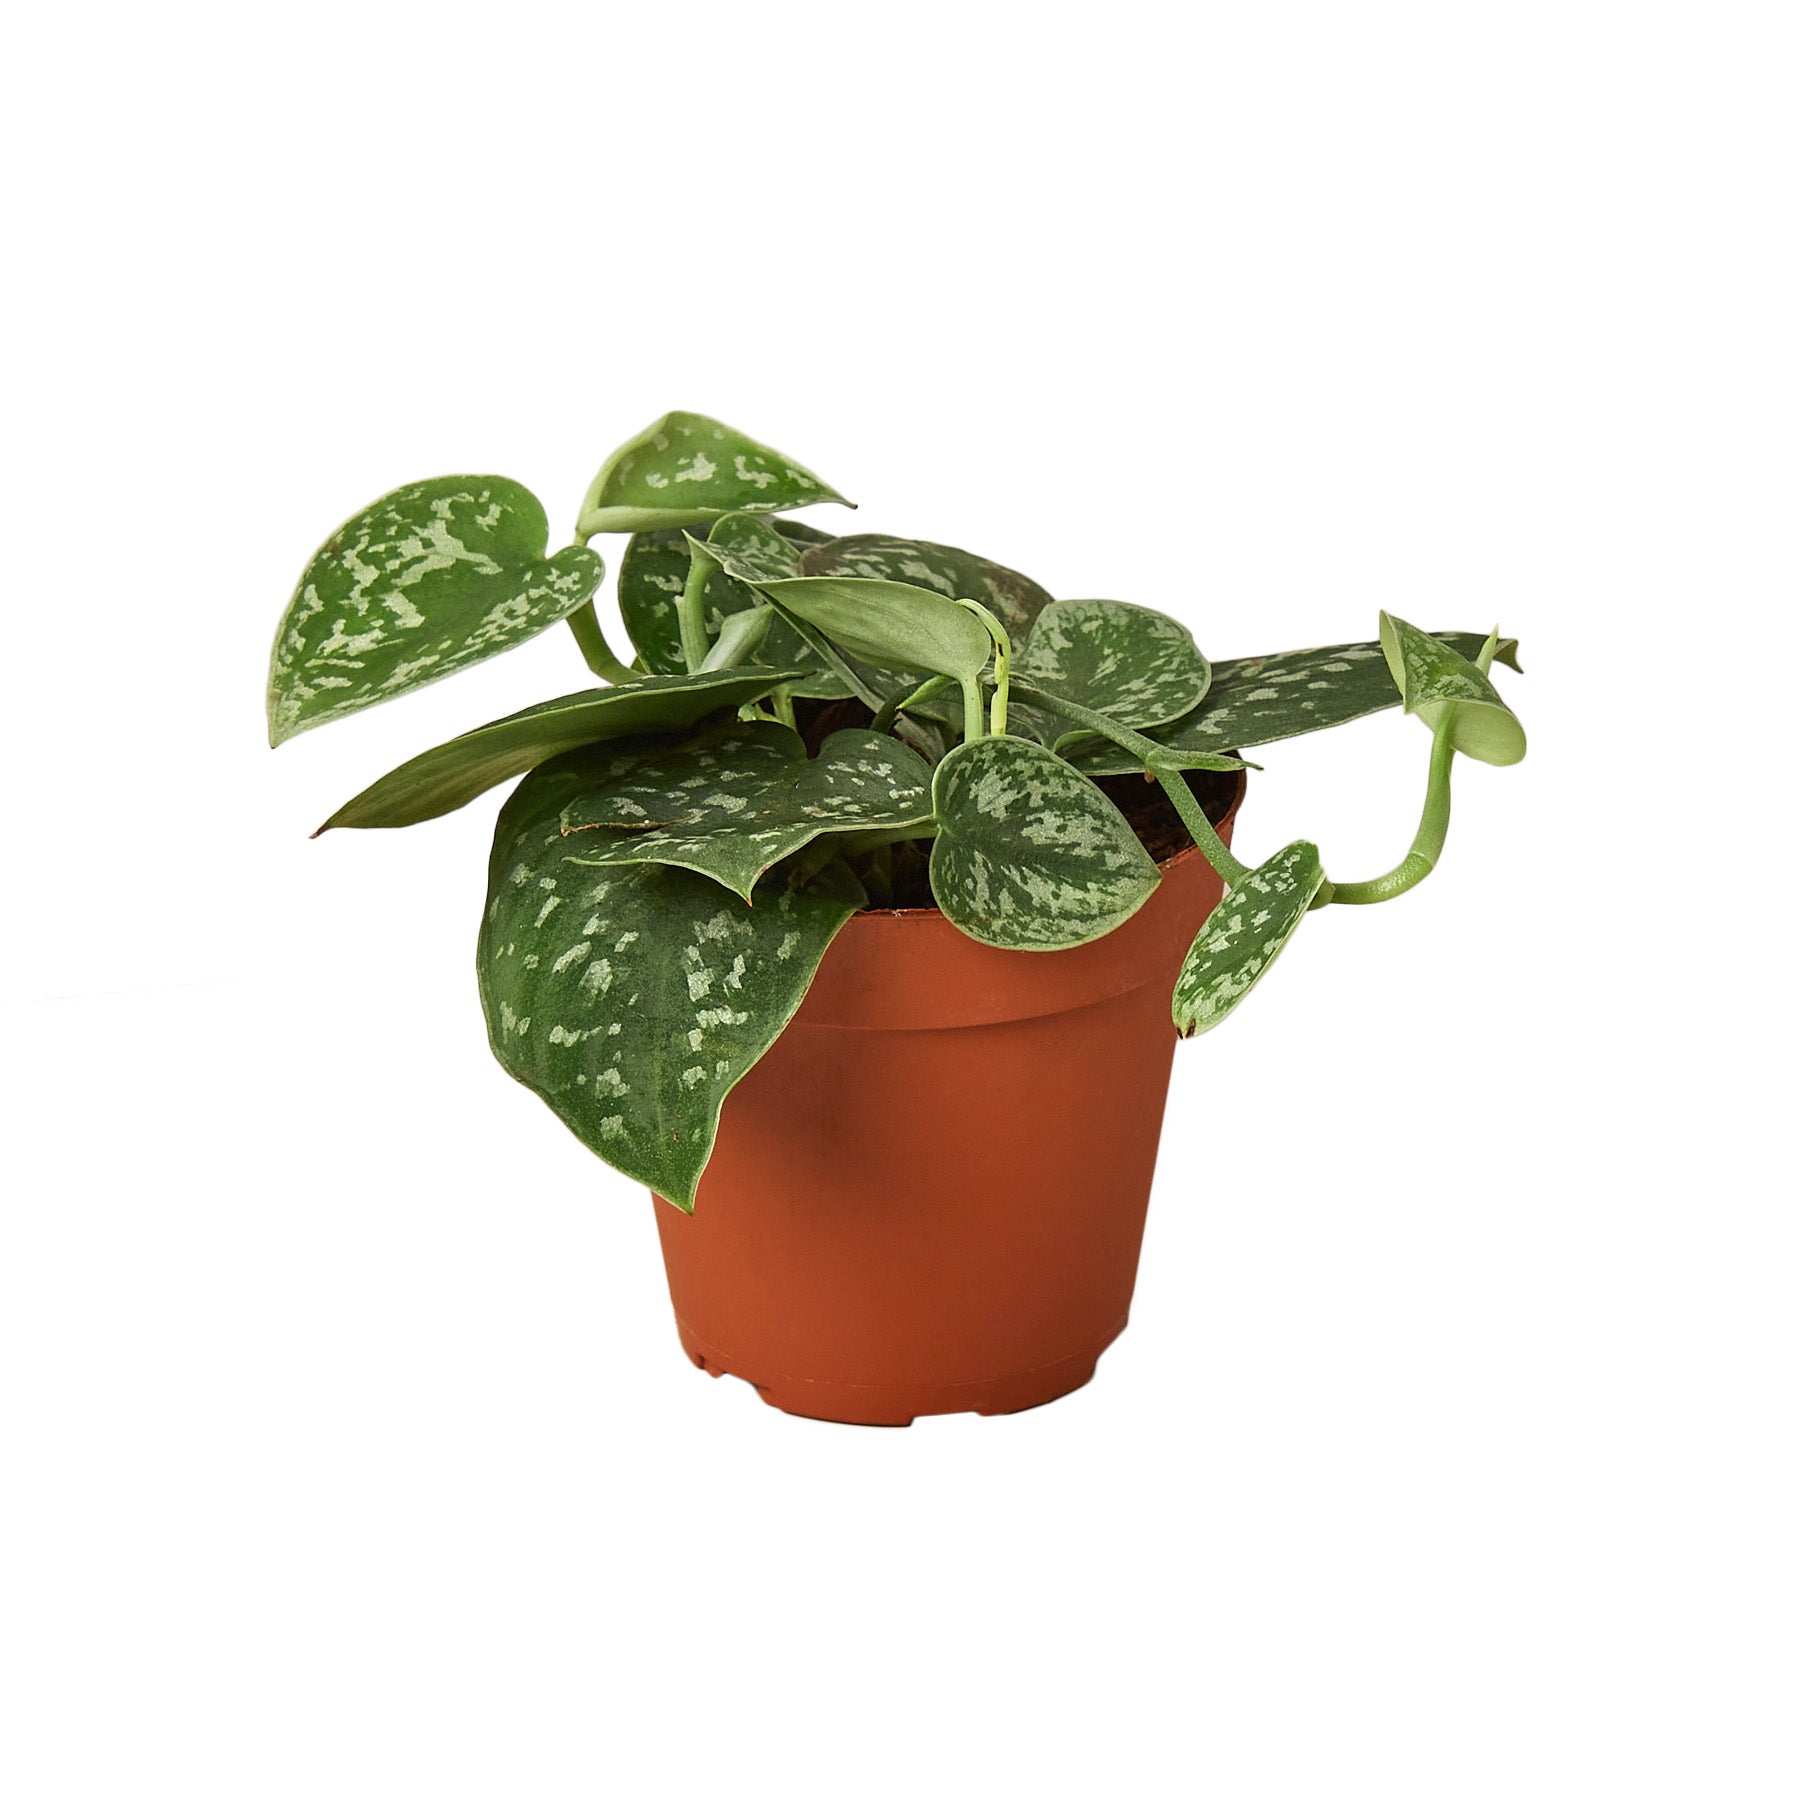 A potted plant on a white background at a garden center near me.